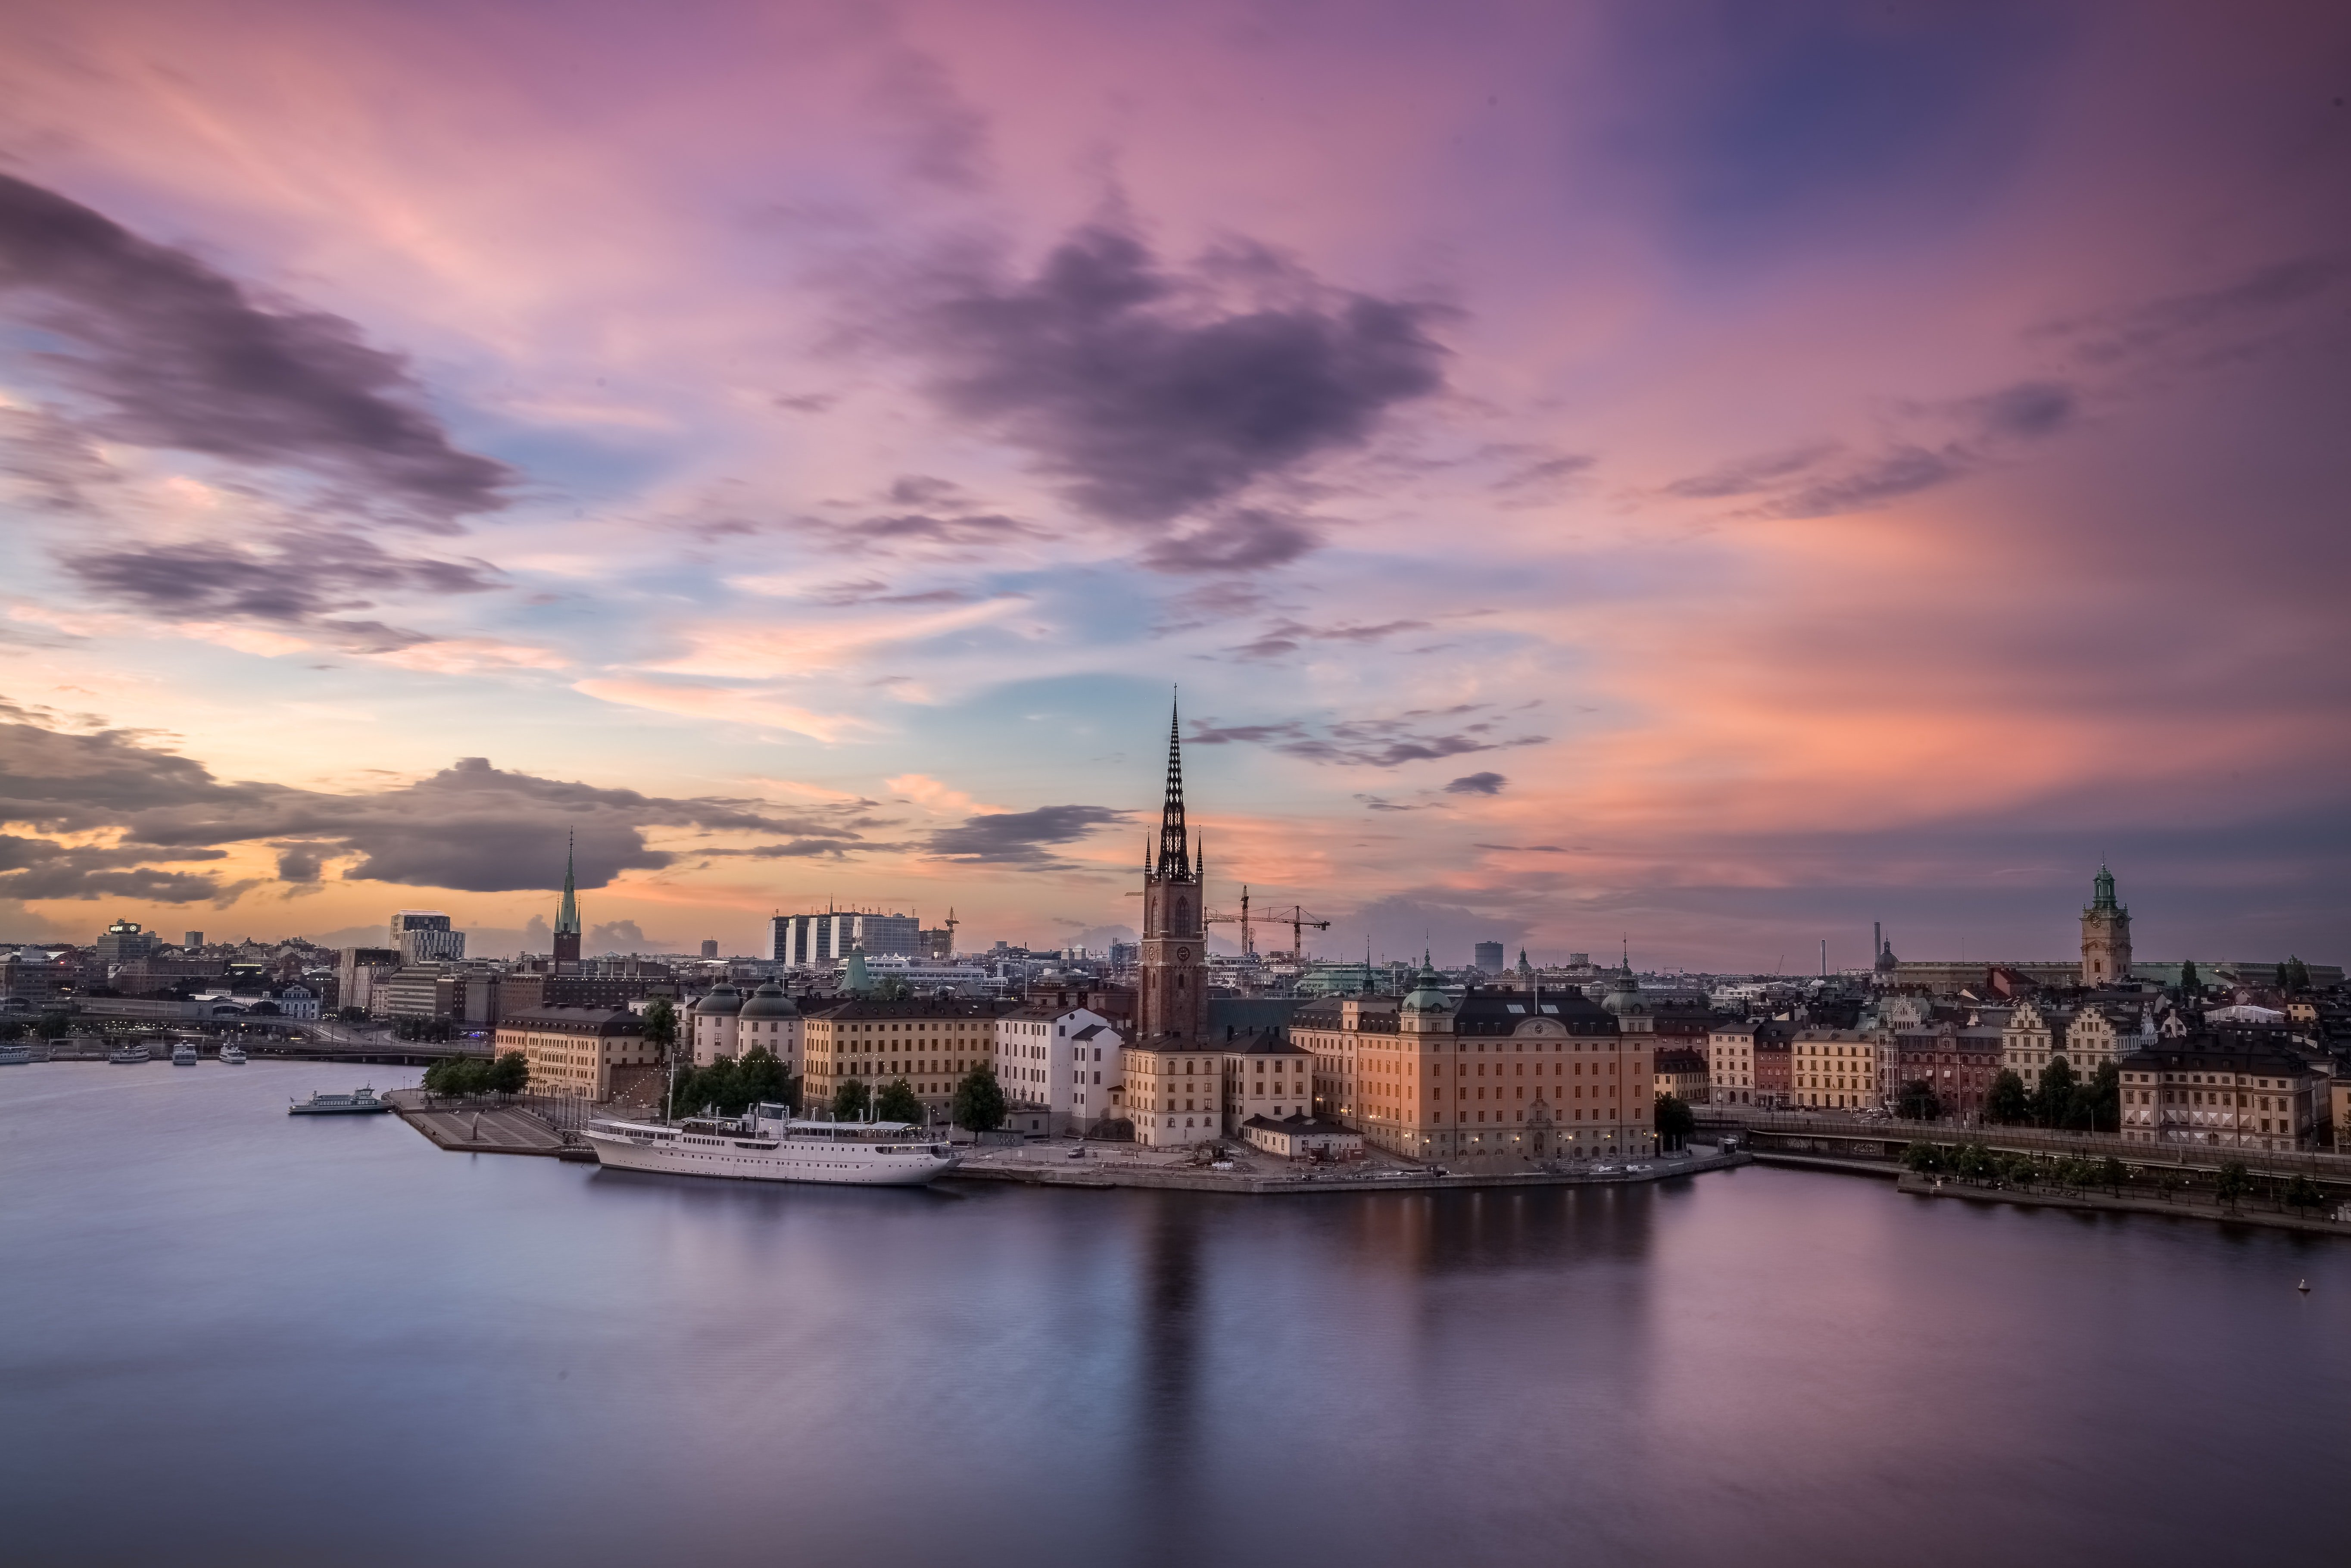 Stockholm sweden the perfect destination for Scandinavia road trips in a group.